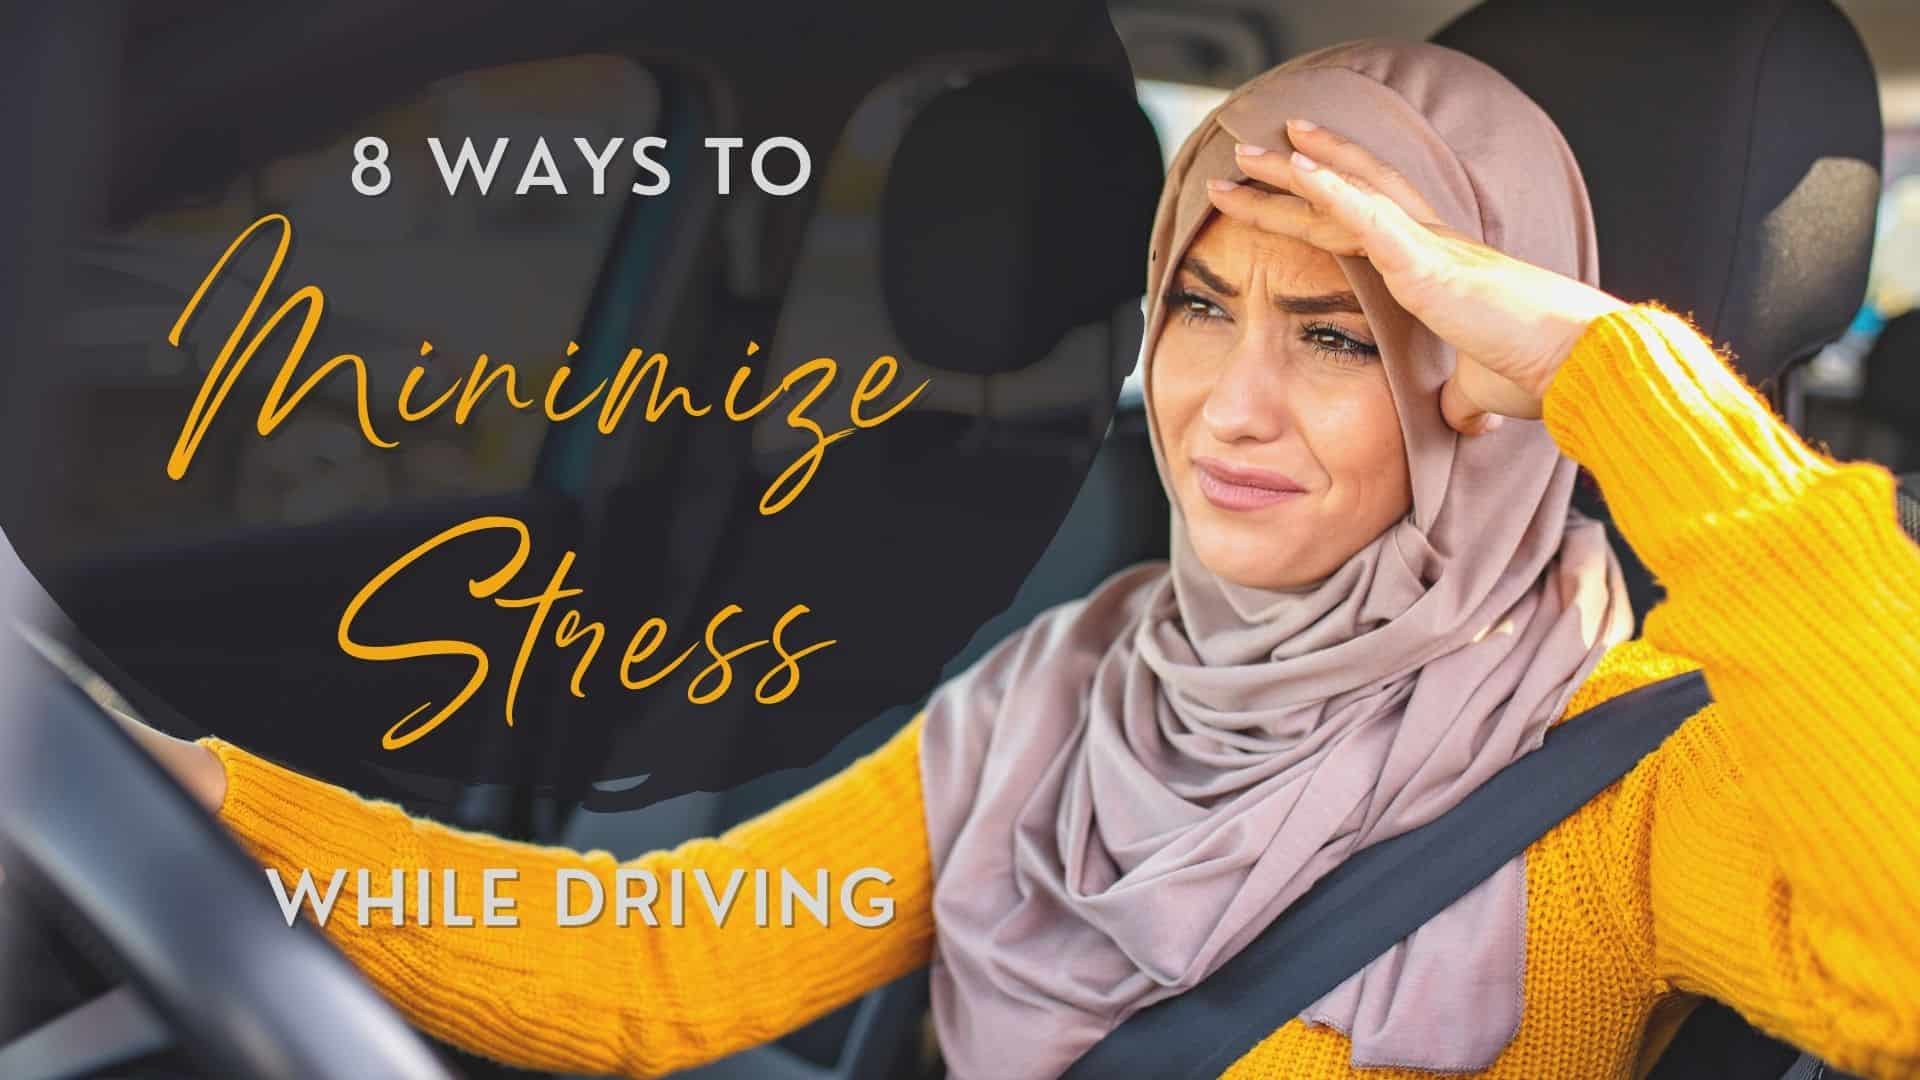 8 Ways to Minimize Stress While Driving